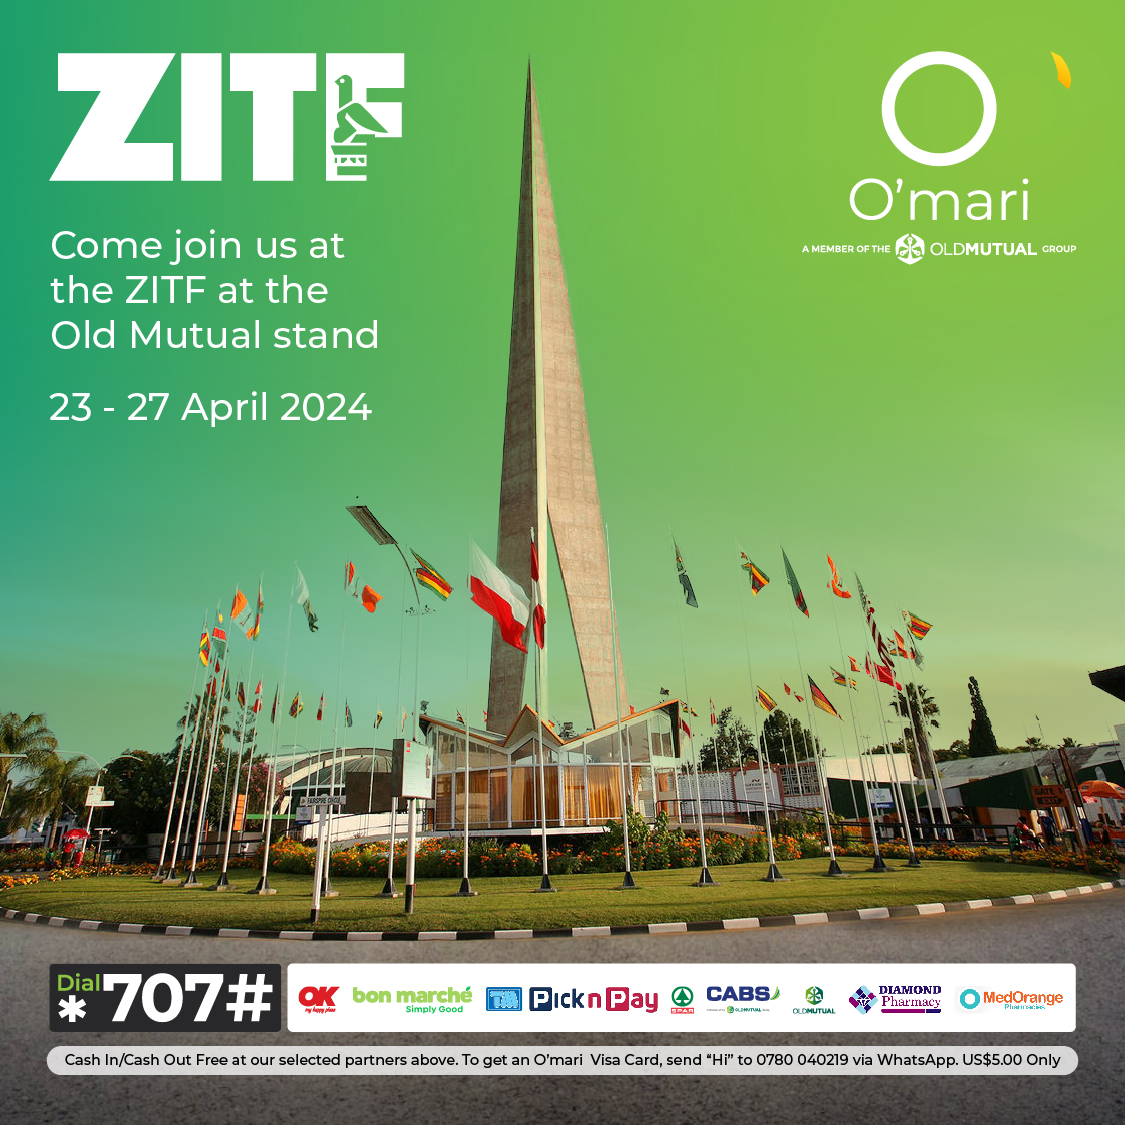 Get Ready for some fun with O’mari at ZITF. Visit us at the Old Mutual Stand and get a chance to WIN awesome prices!
#Omari #JointheCircle #ZITF2024 #zitf